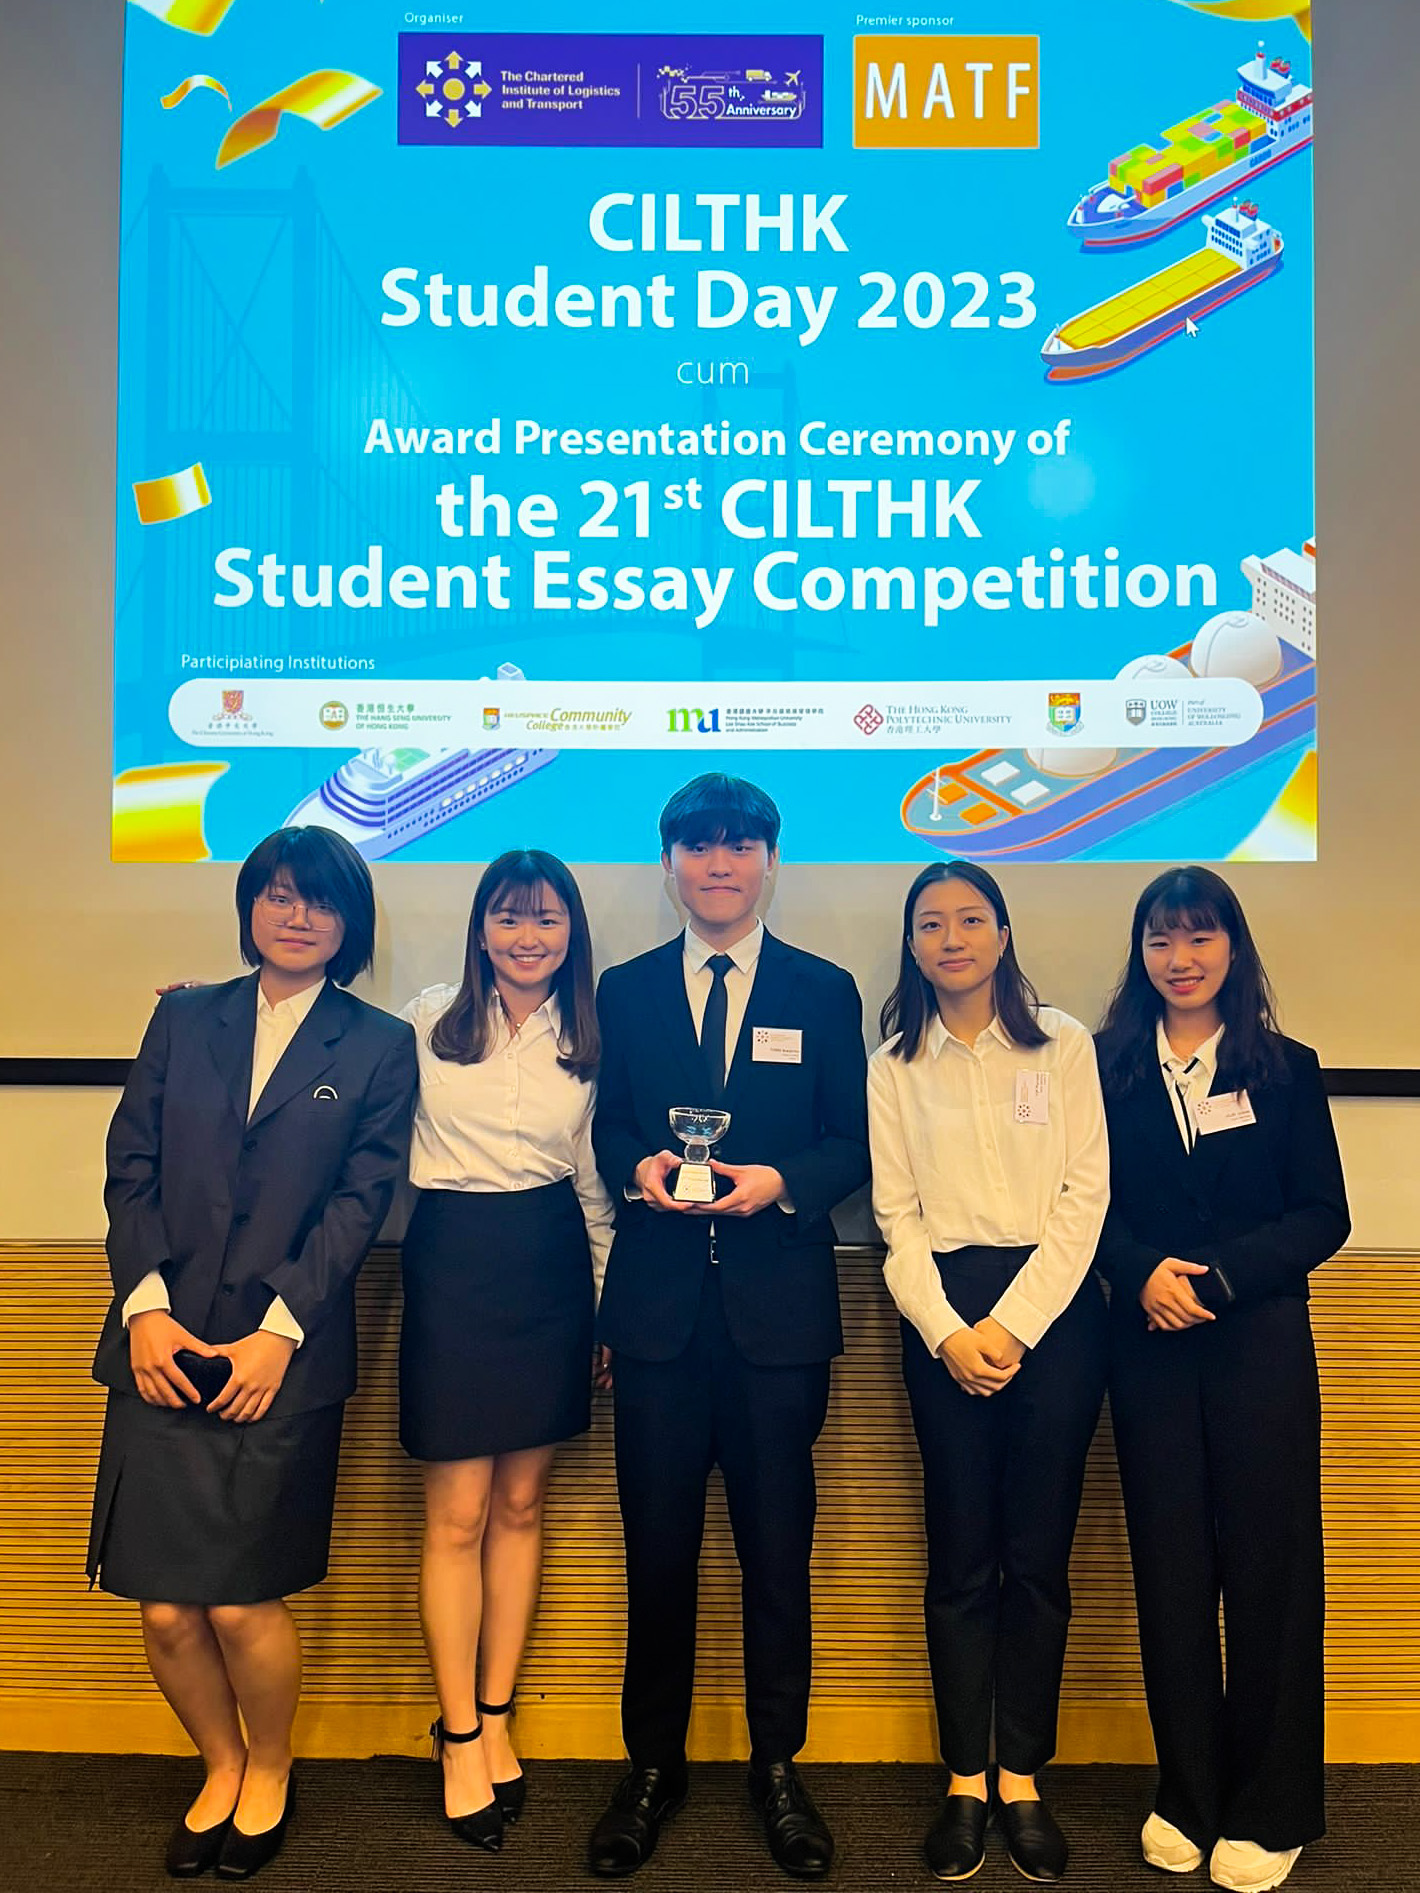 2nd Runner-up in CILTHK Student Day 2023